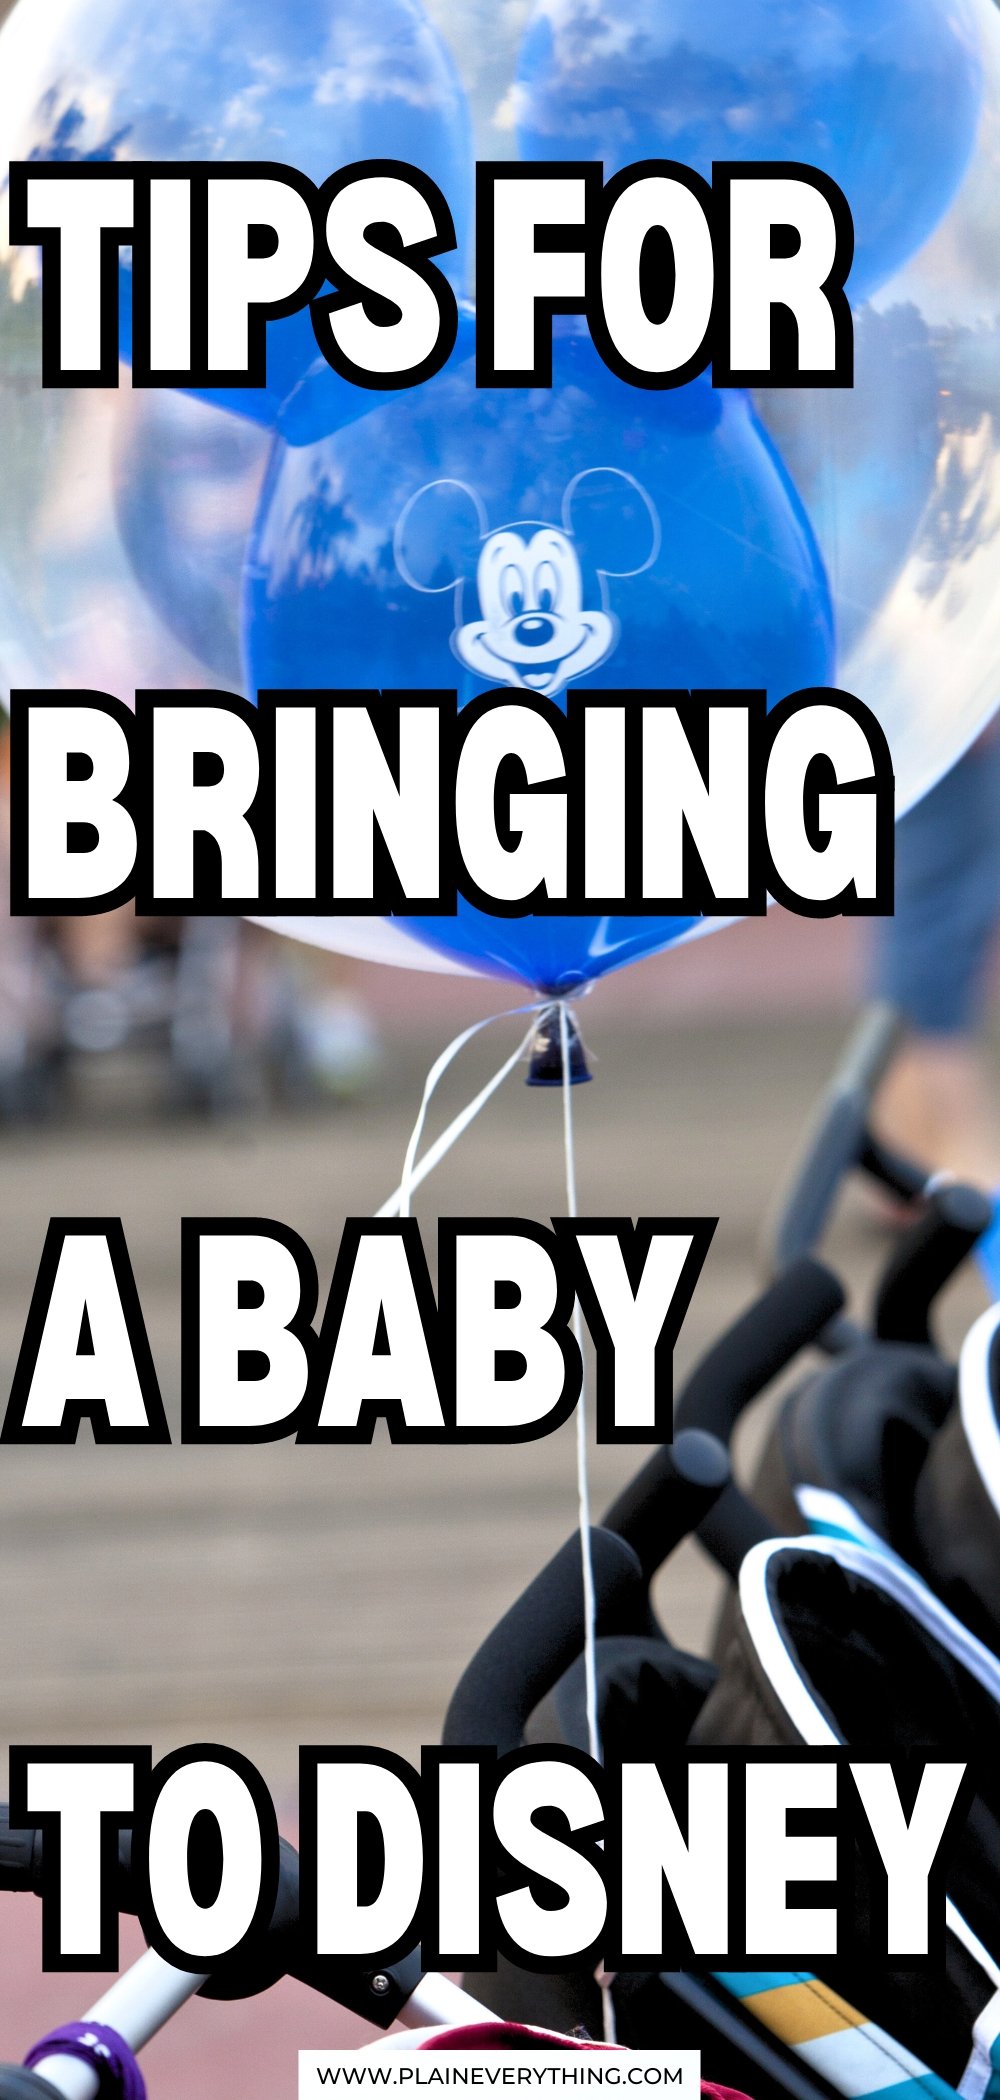 Tips For Bringing a Baby to Walt Disney World